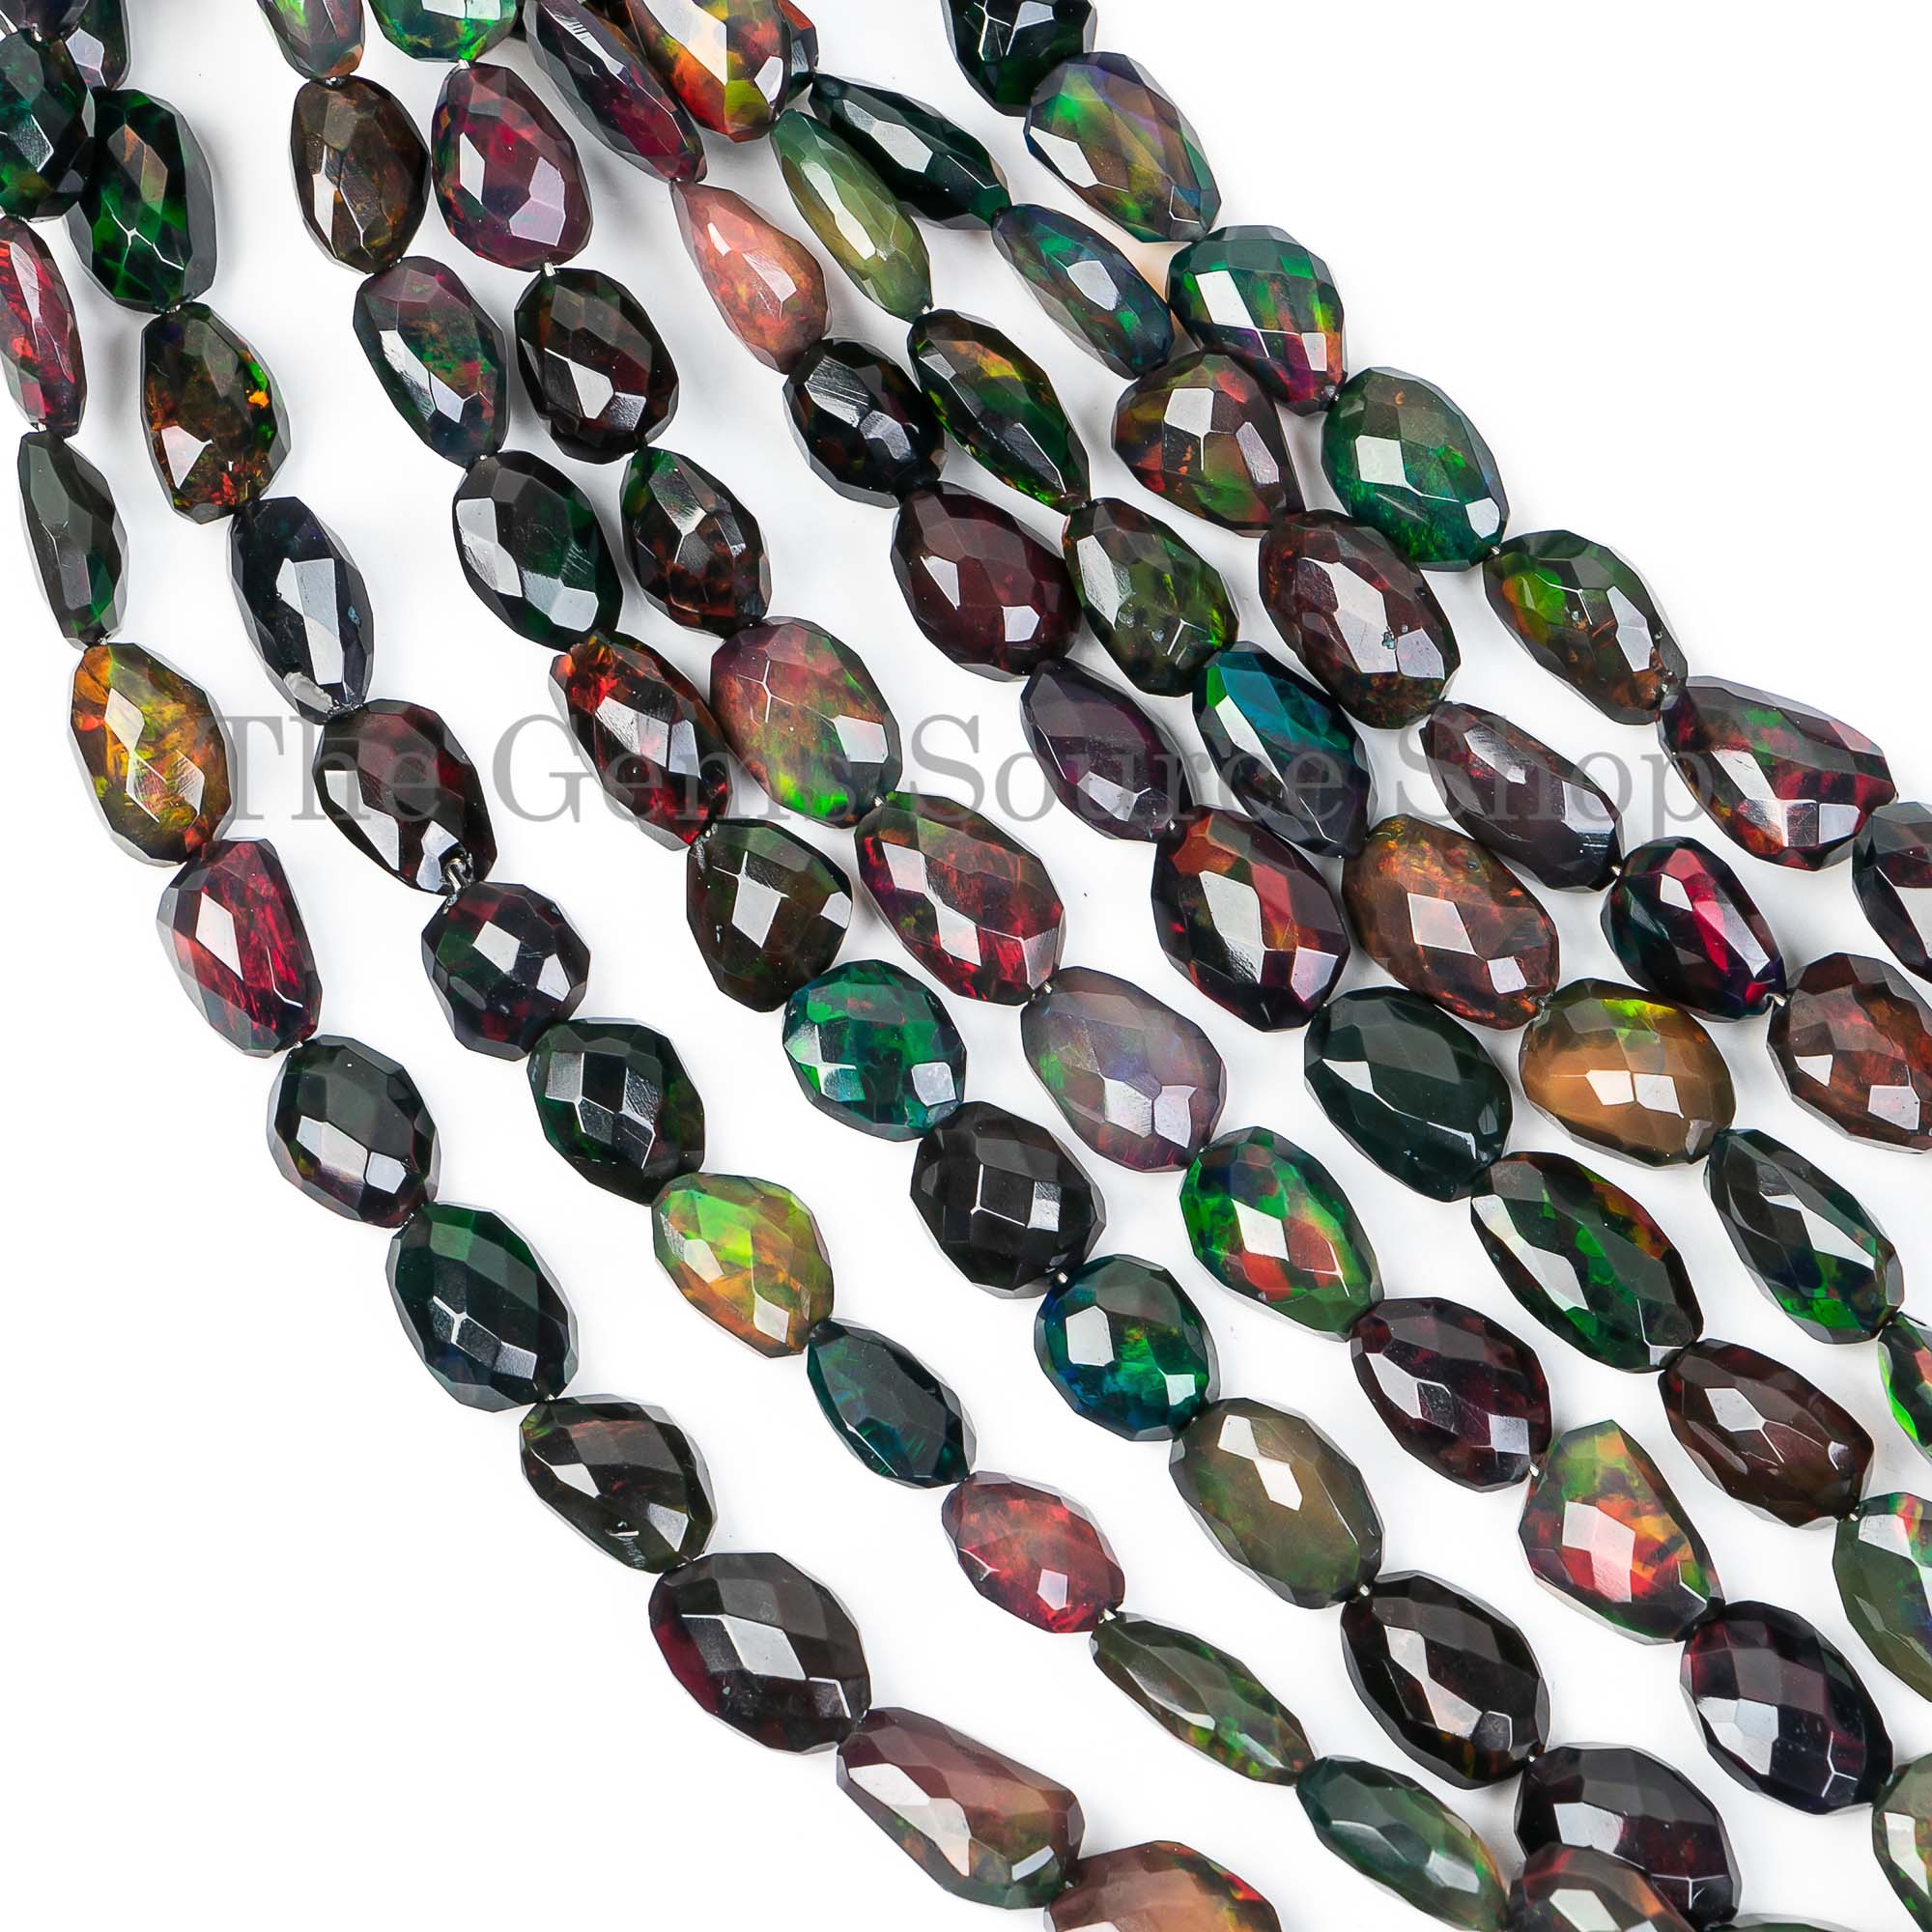 Black Ethiopian Opal Faceted Nuggets, Opal Beads, Nuggets Beads,